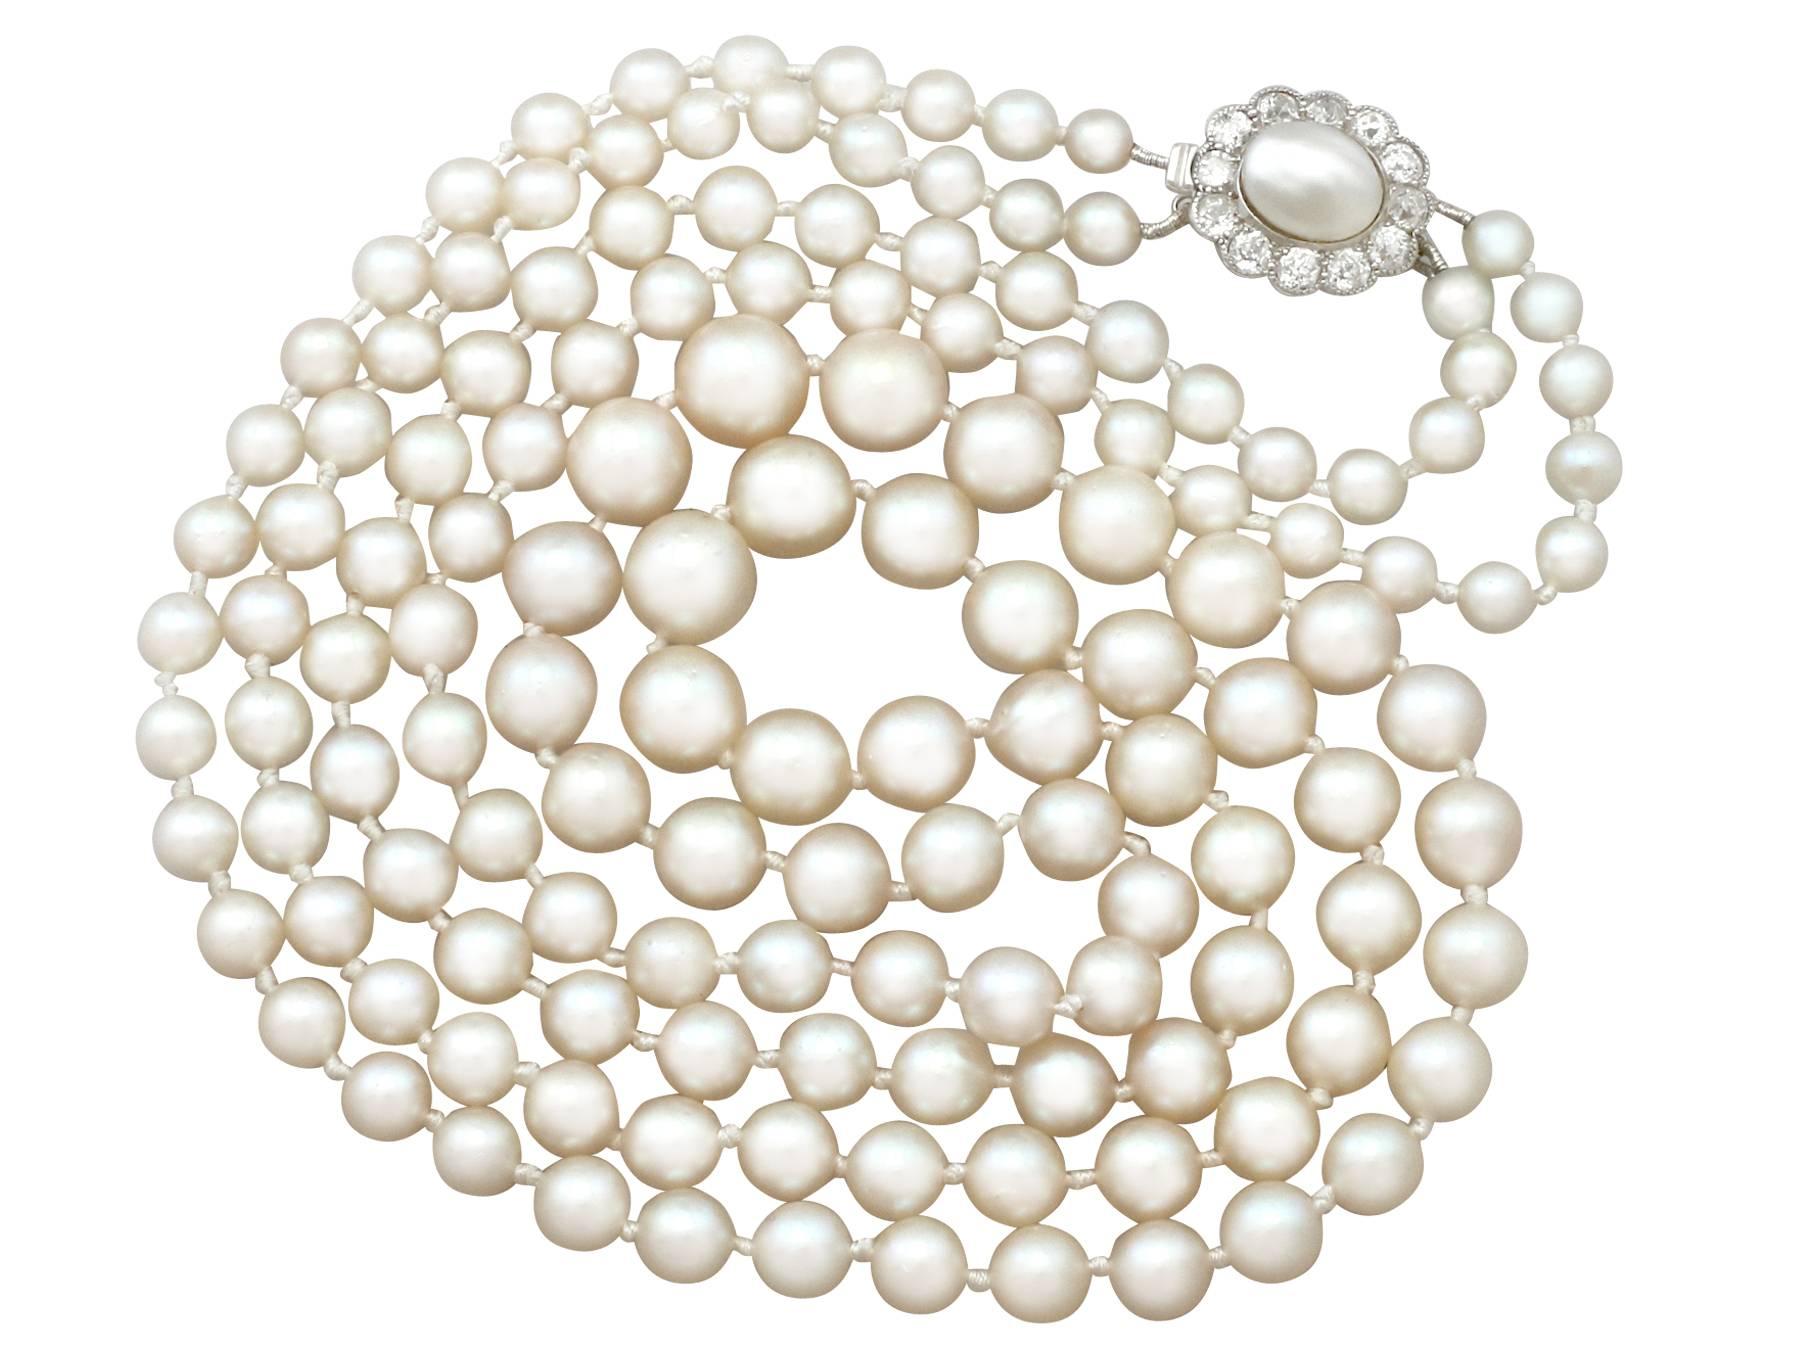 A fine and impressive vintage double strand cultured pearl necklace with an antique 0.84 carat diamond and natural pearl, 14 karat yellow gold, platinum set clasp; part of our diverse pearl jewelry collection.

This impressive vintage double strand